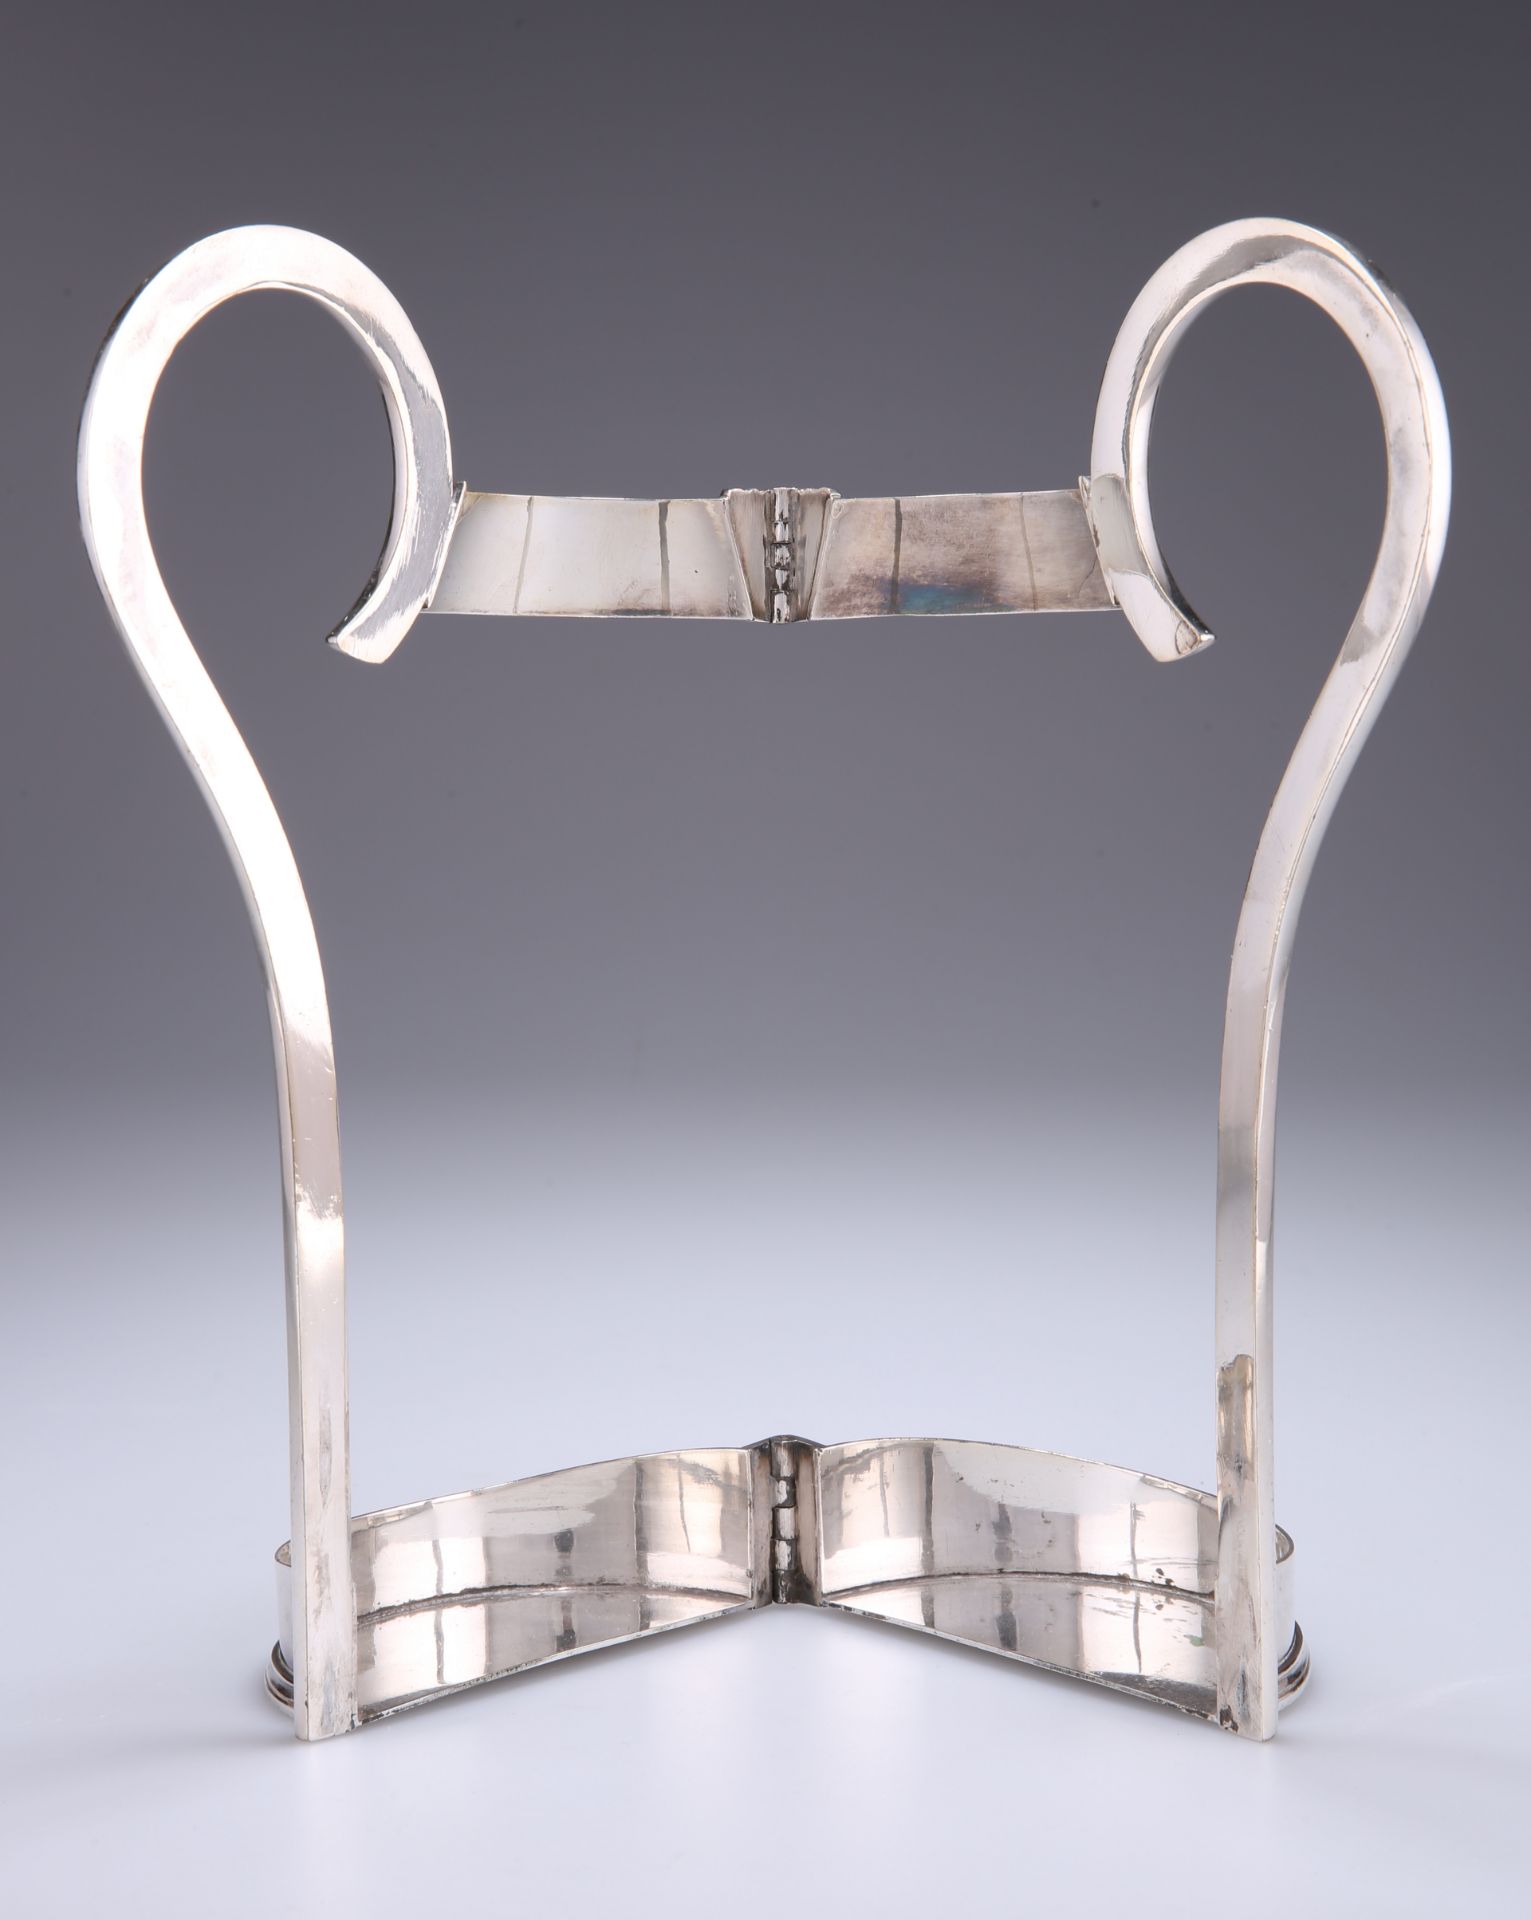 A 19TH CENTURY SILVER-PLATED BOTTLE HOLDER